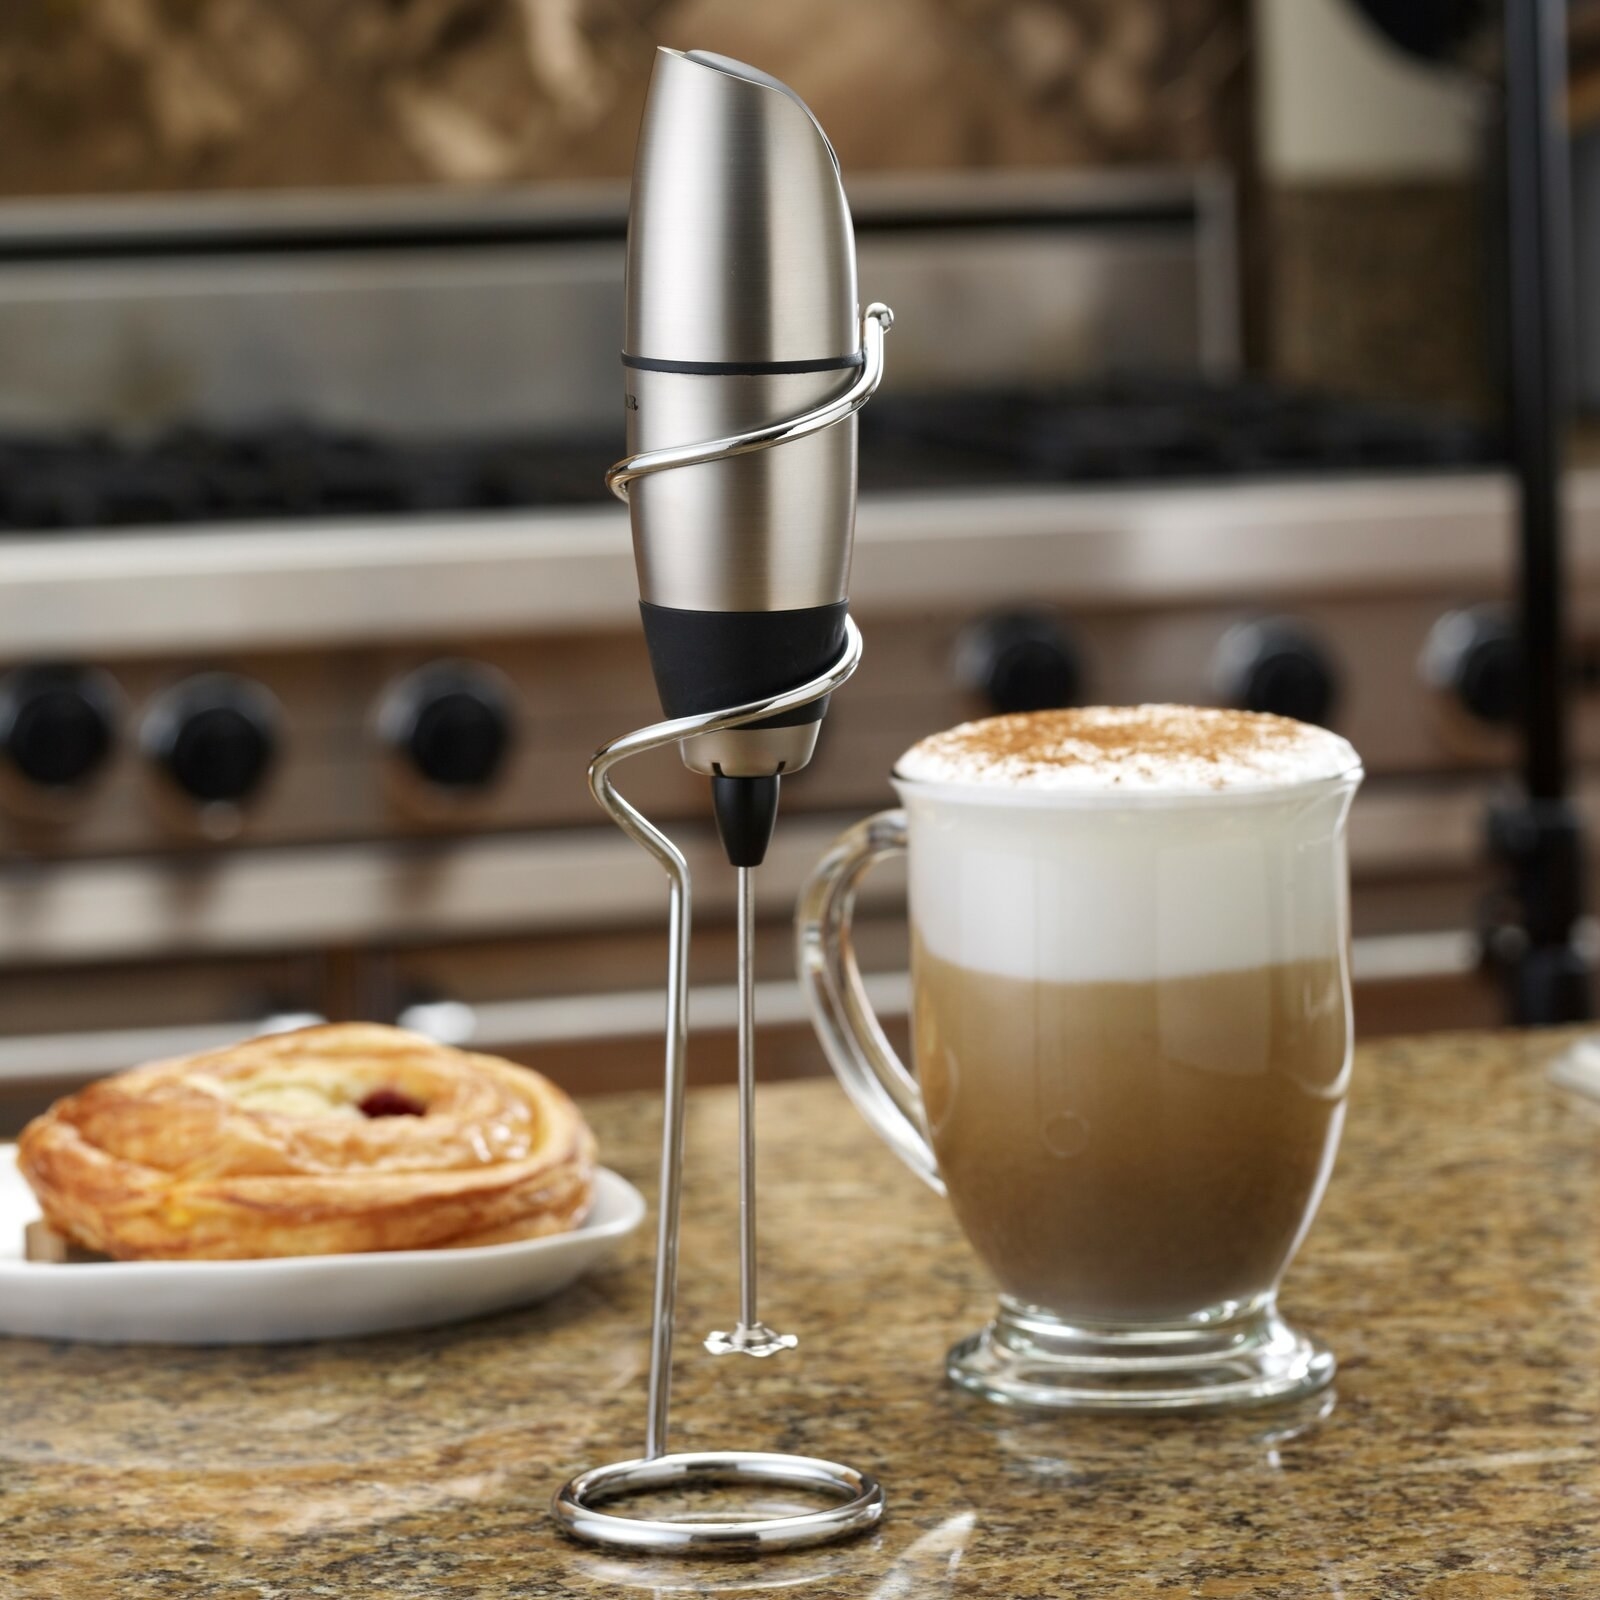 The milk frother next to a cup of coffee on a kitchen counter